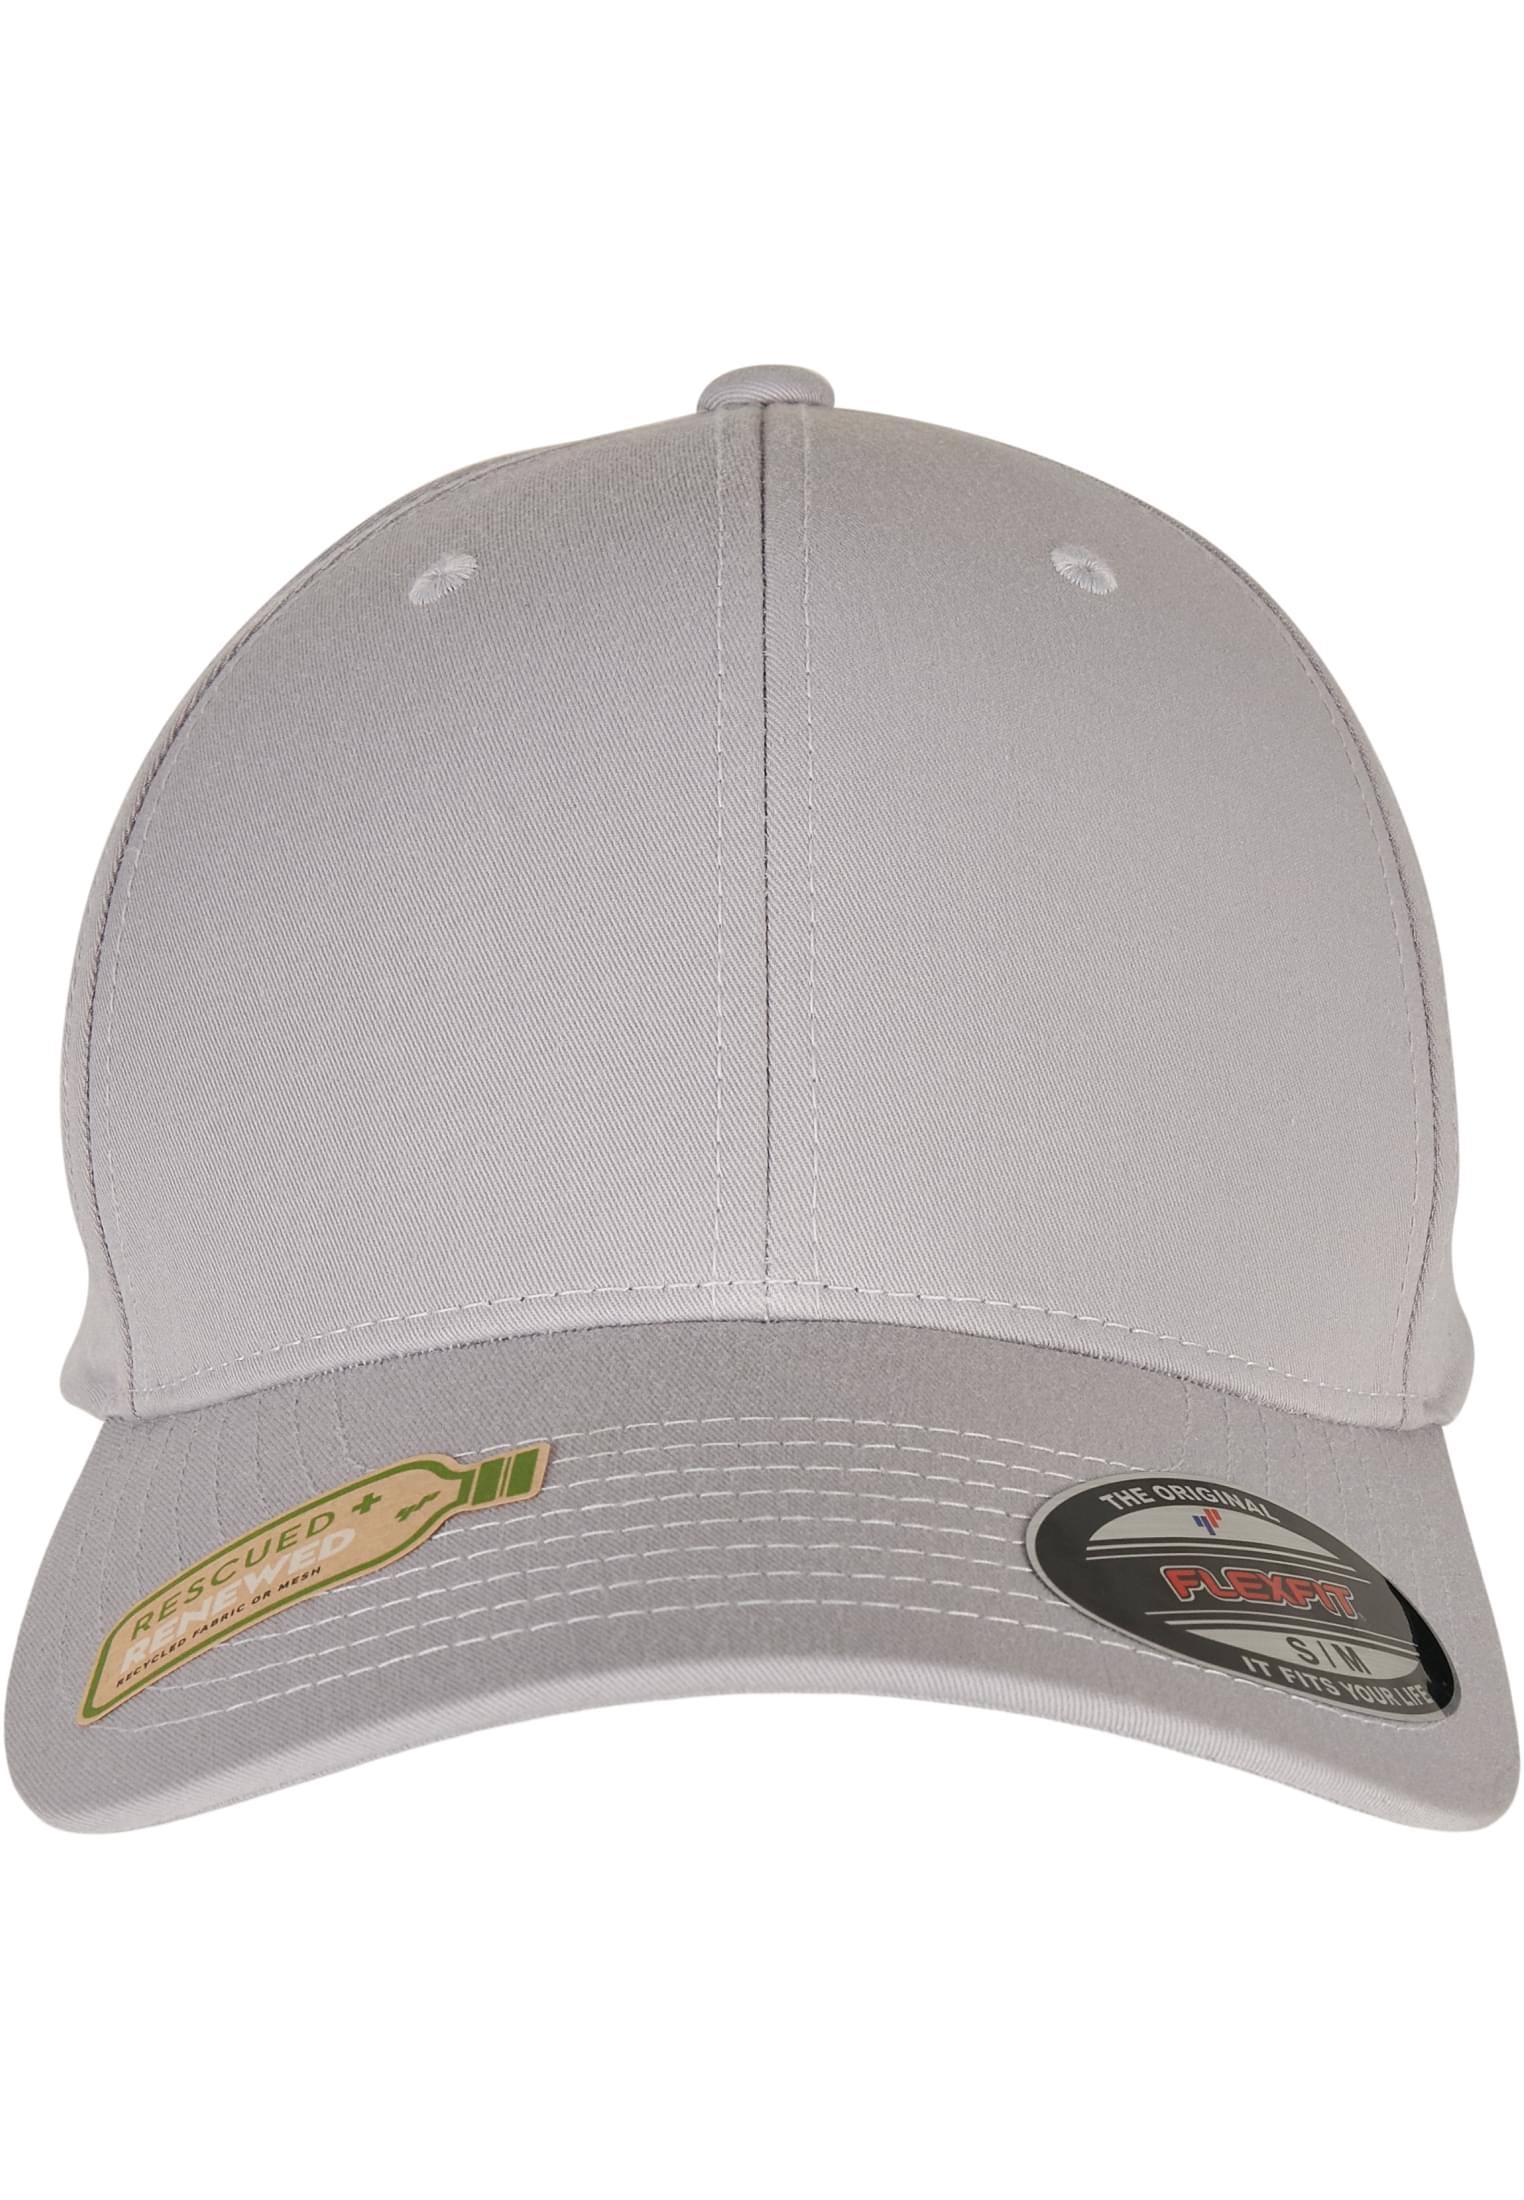 Polyester Flexfit Cap-6277RP Recycled